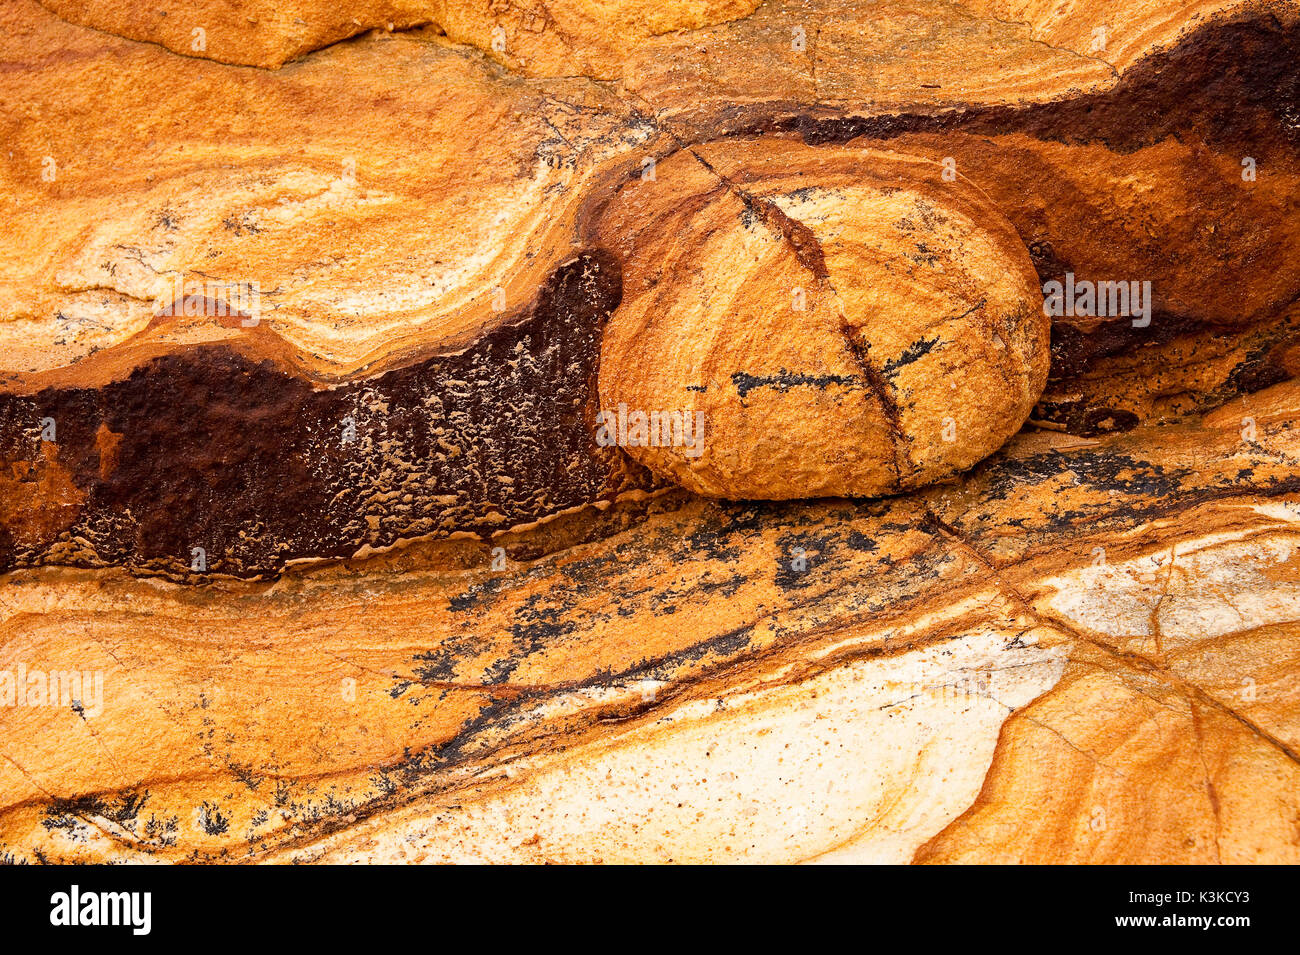 Sandstone with miraculous structures and forms in golden colour on a beach in New Zealand. A knob looks out like an animal eye. Stock Photo